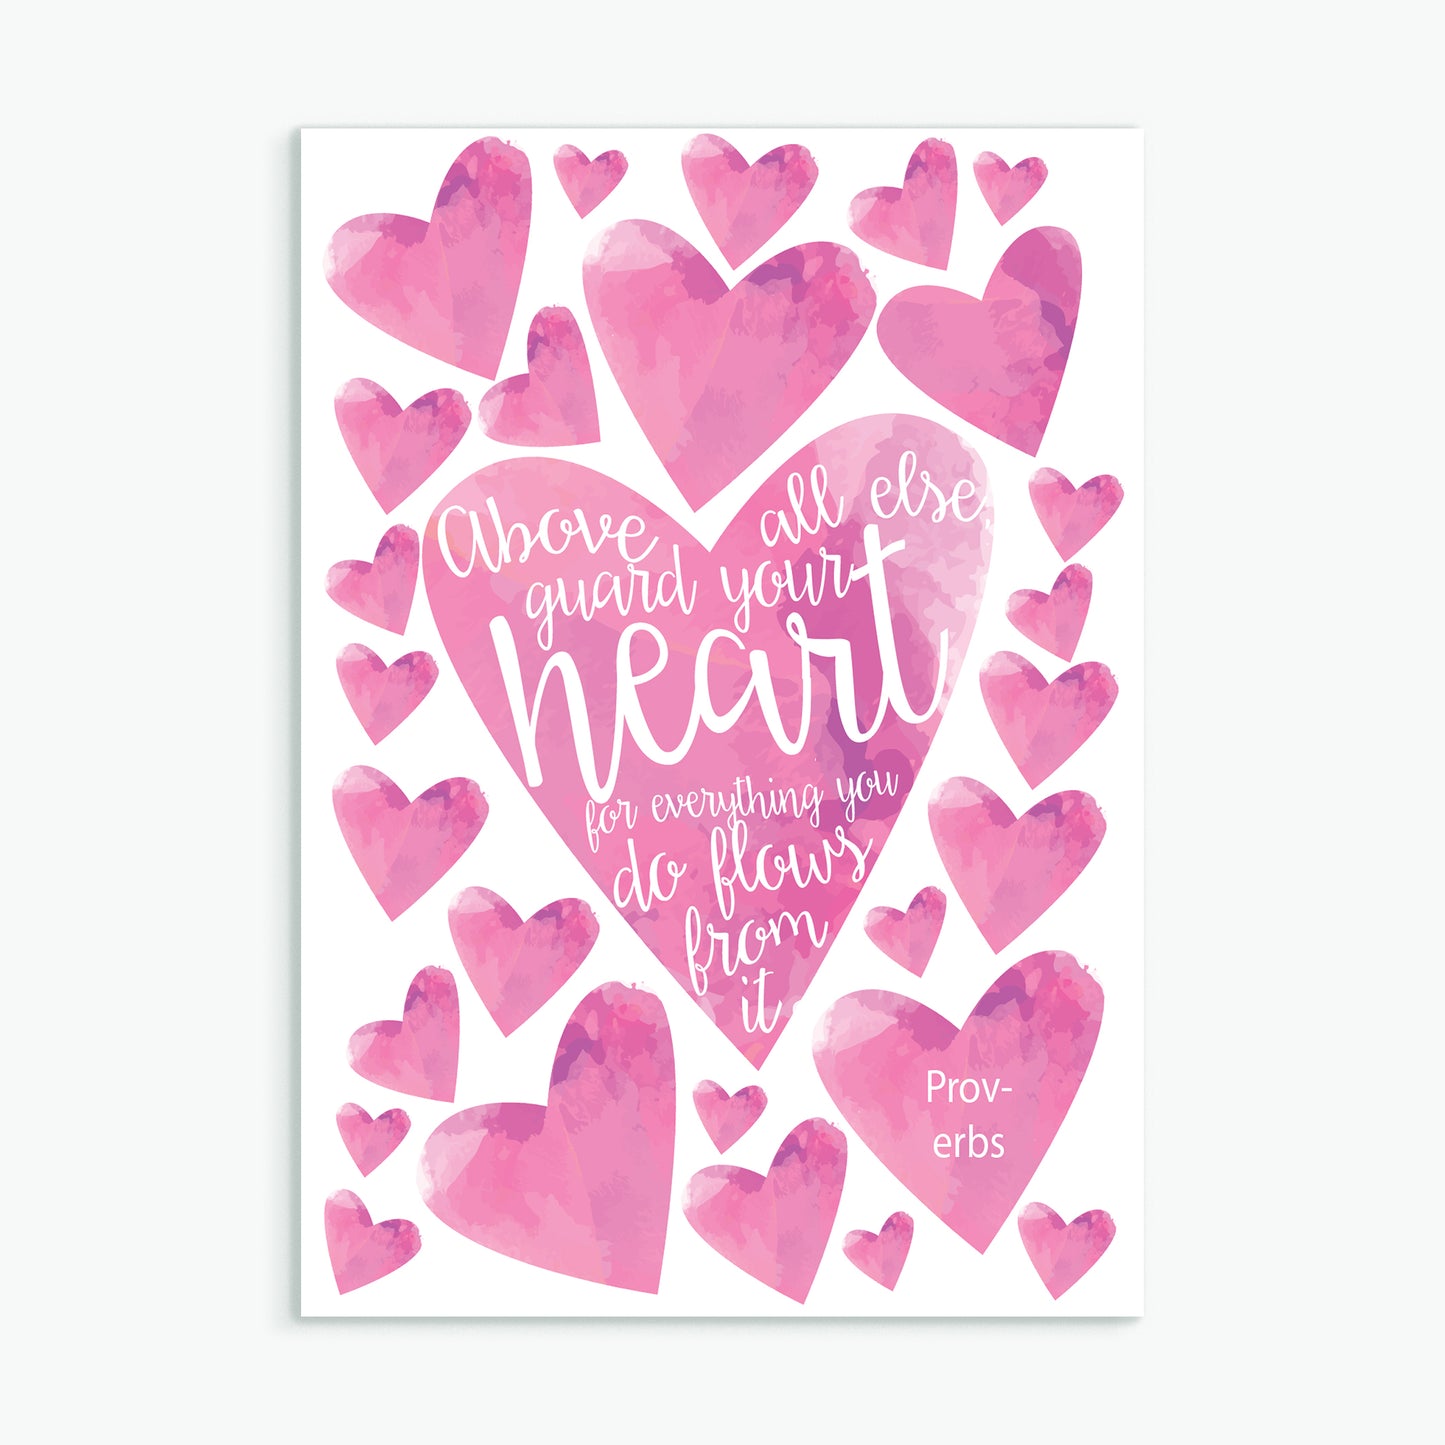 'Guard Your Heart' by Preditos - Greeting Card